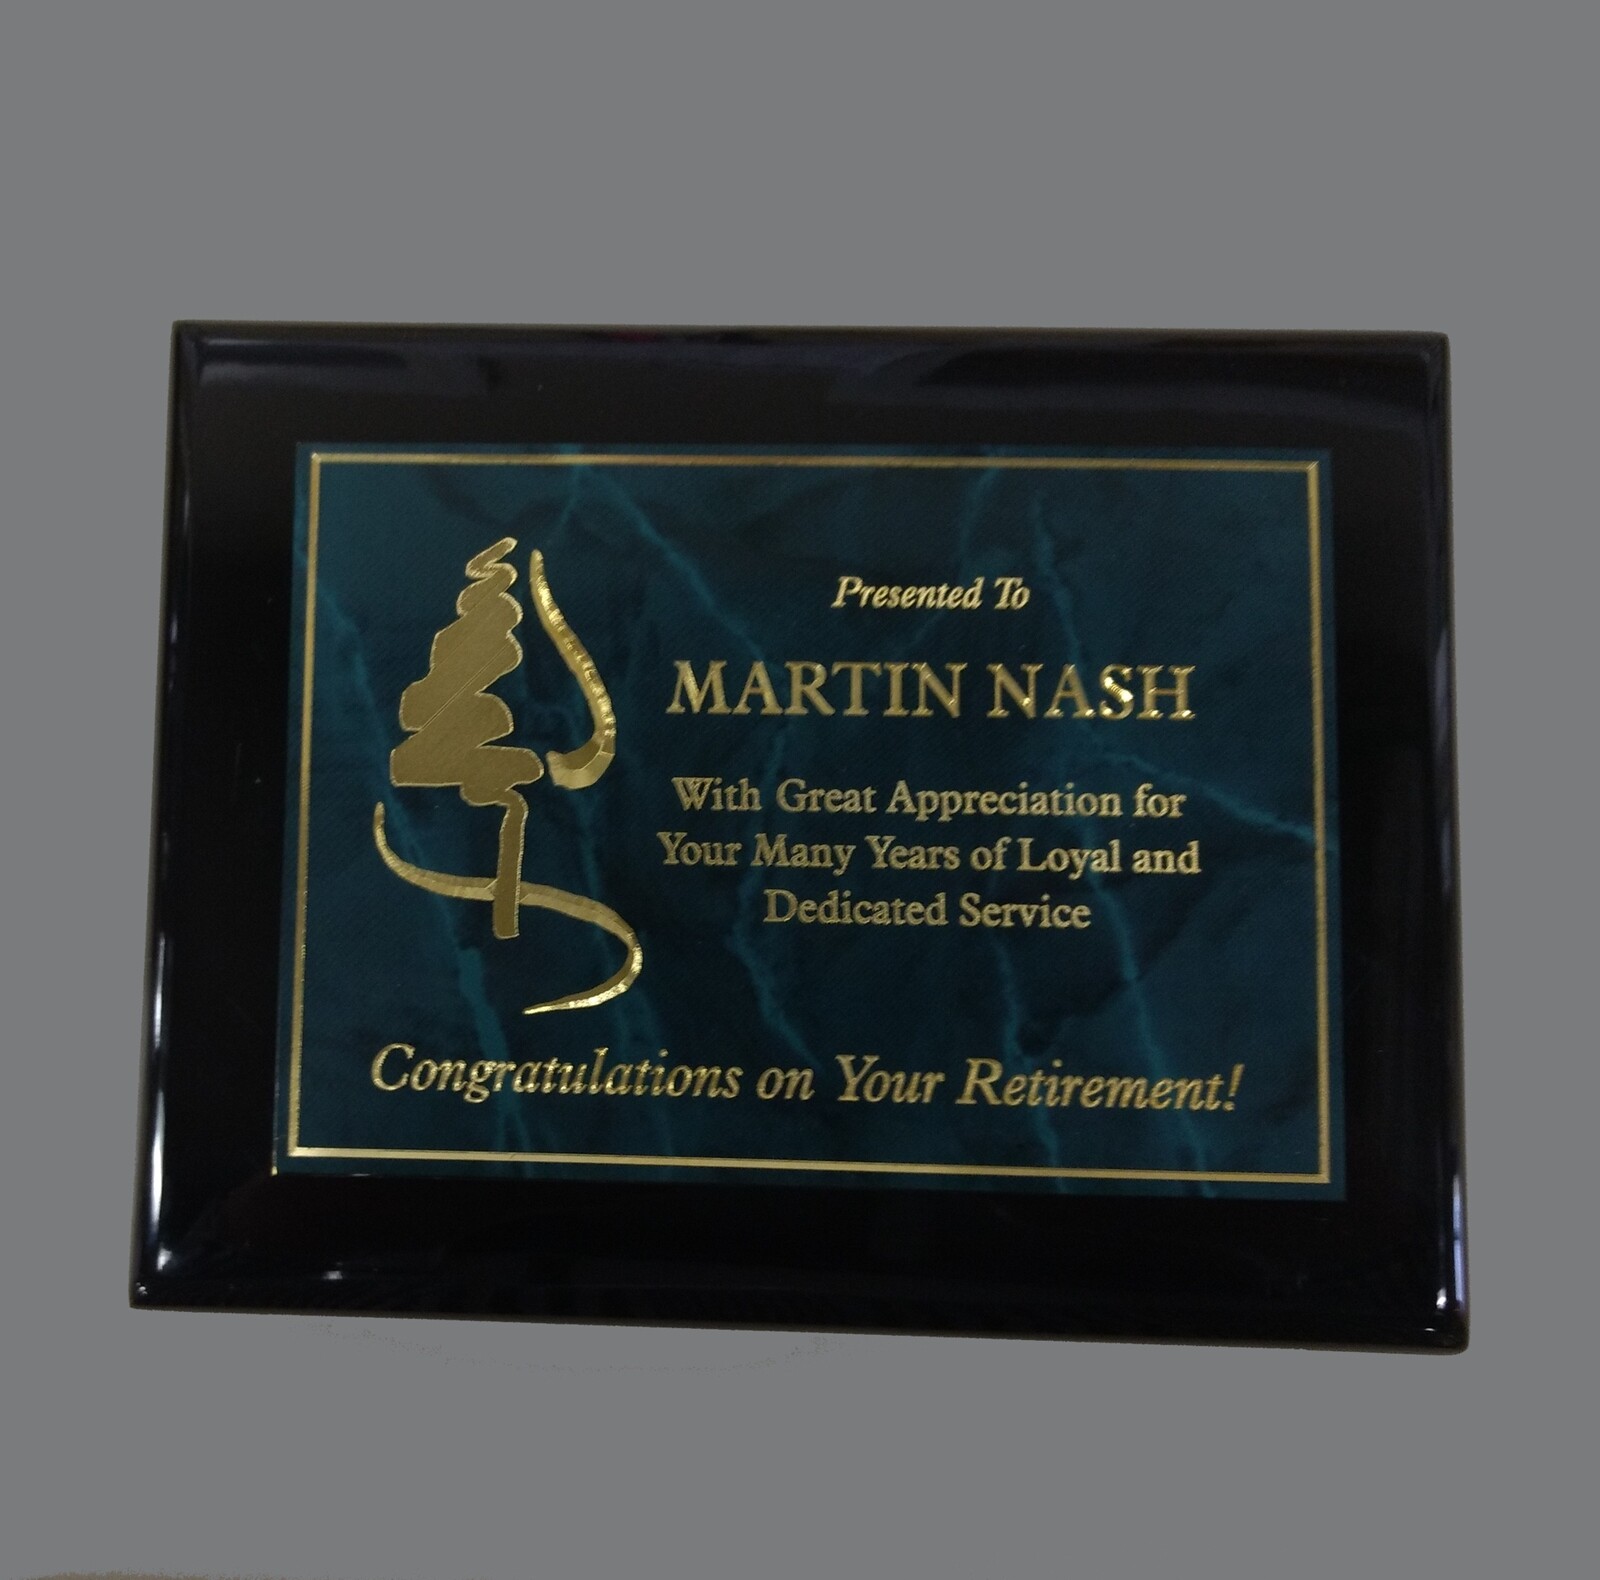 Black Piano Finish Award Plaque With Green Marbled Plate In 5 Sizes